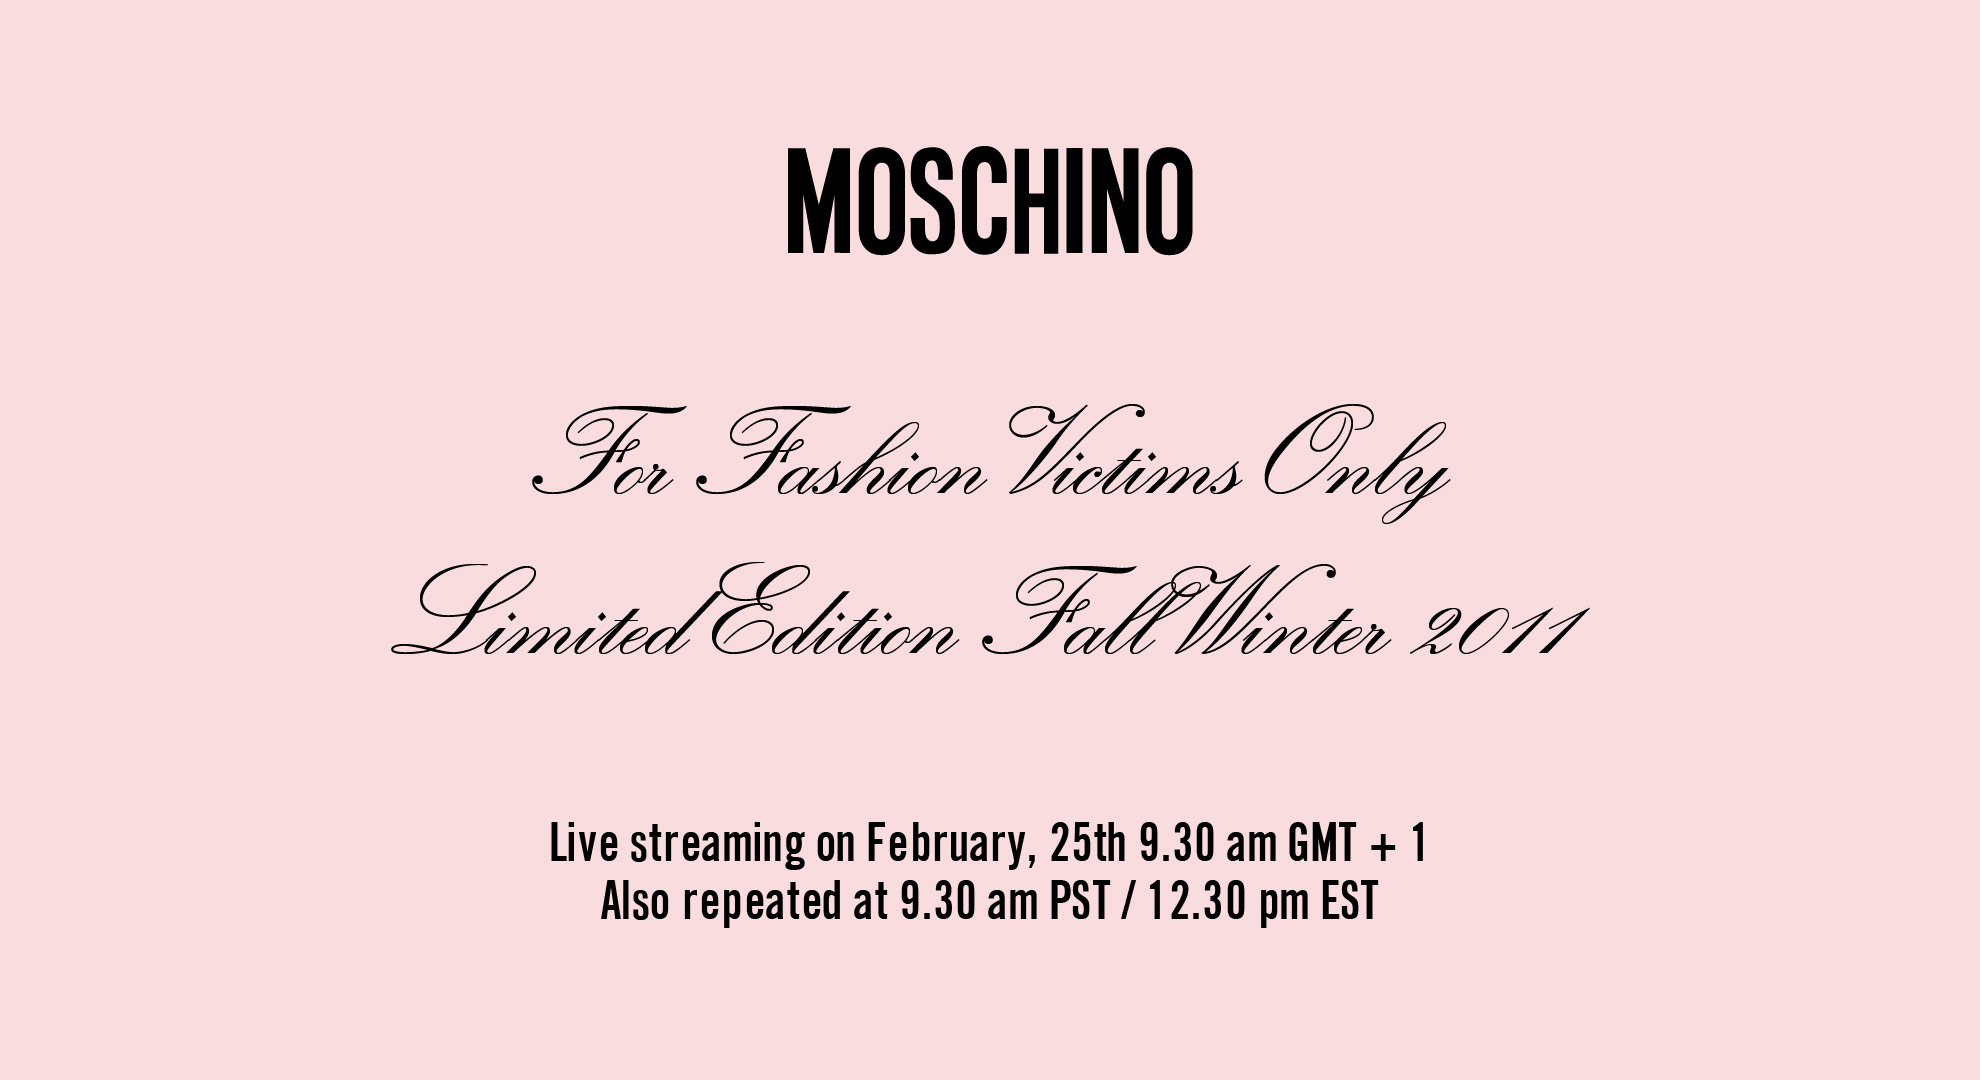 Moschino to Live Stream its Fall 2011 Runway Show